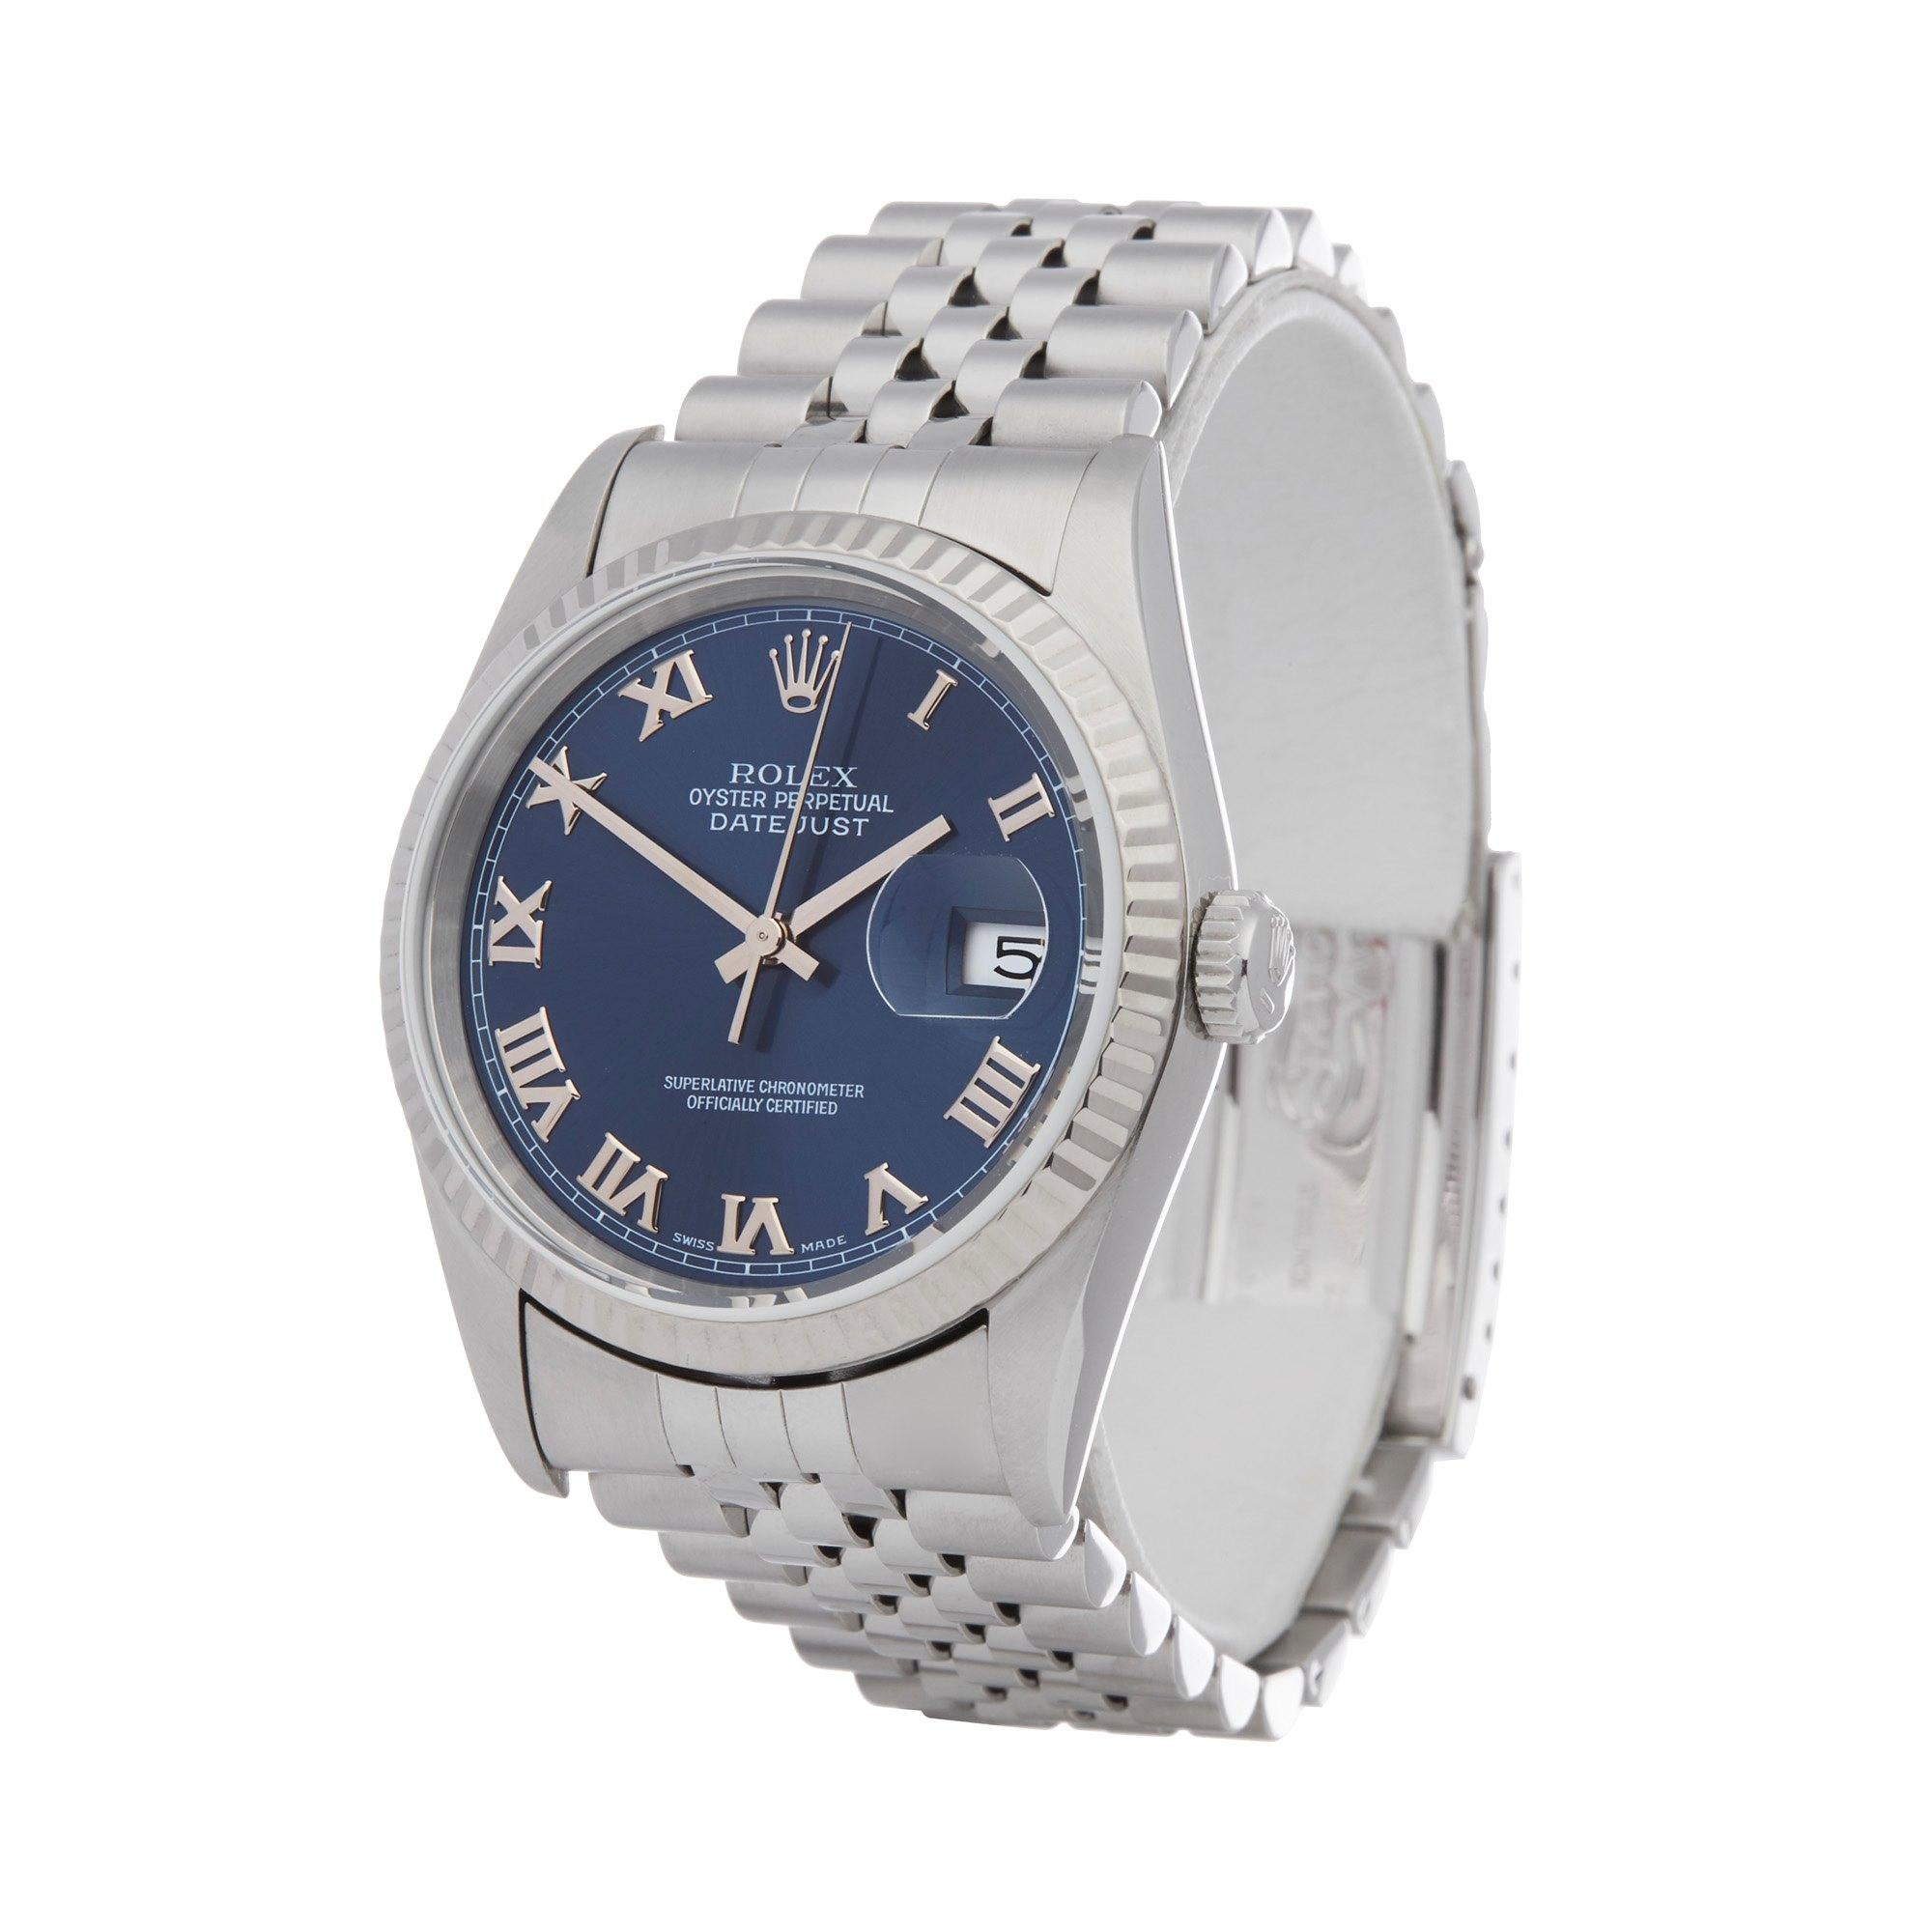 Xupes Reference: W007417
Manufacturer: Rolex
Model: Datejust
Model Variant: 36
Model Number: 16234
Age: 1998
Gender: Unisex
Complete With: Rolex Box
Dial: Blue Roman
Glass: Sapphire Crystal
Case Size: 36mm
Case Material: Stainless Steel
Strap